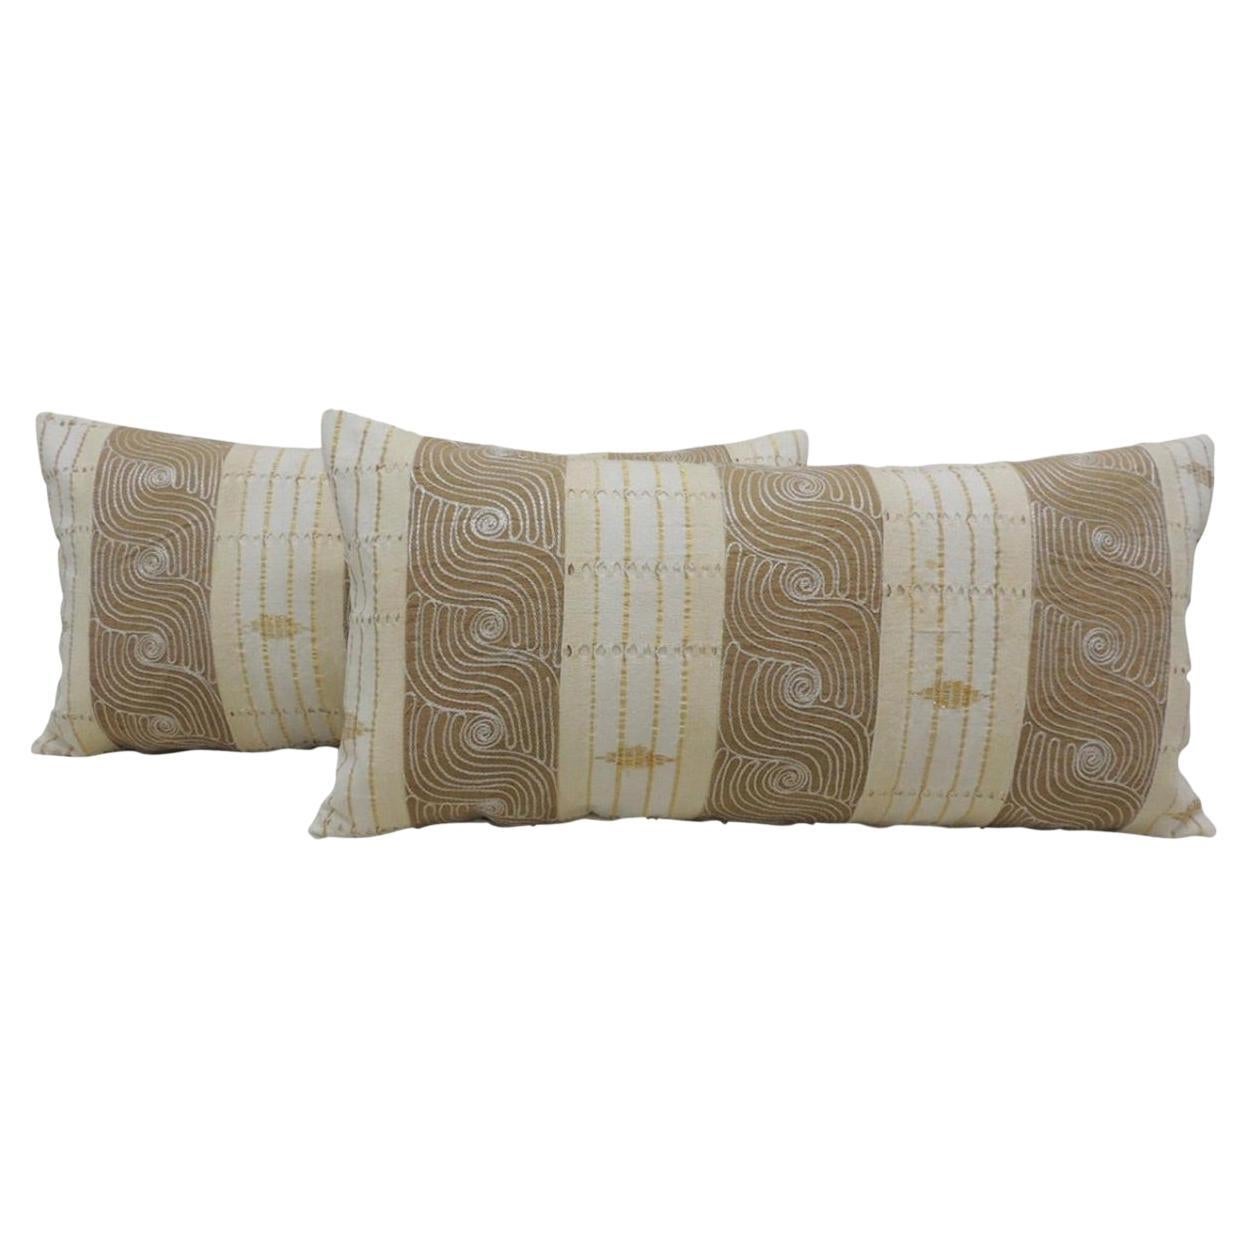 Pair of Bolster Pillows in Vintage Tan & Brown African Woven, Ghana 1980's